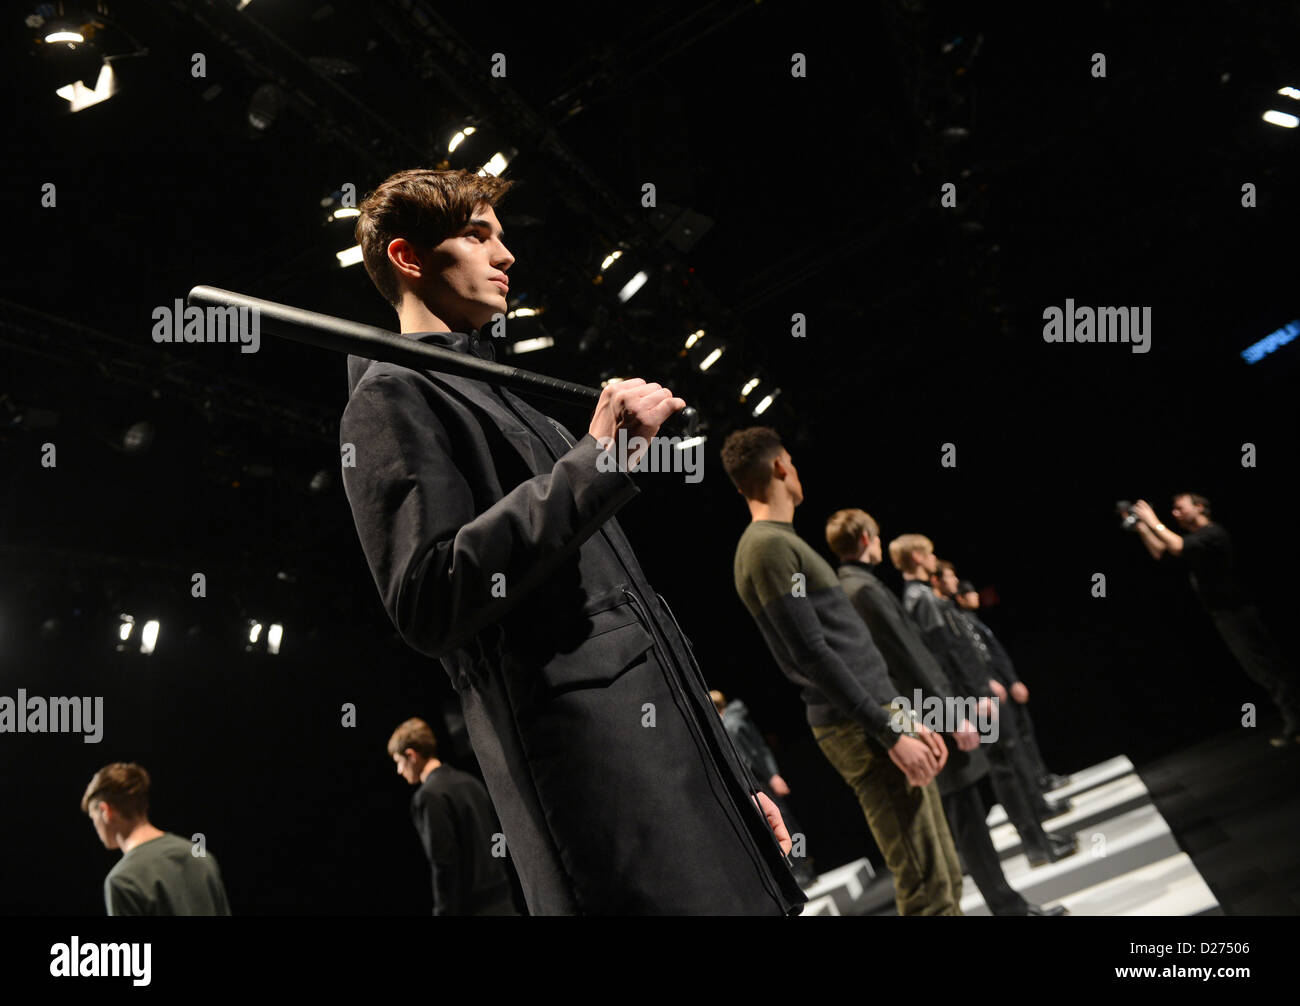 Models pose at the Sopopular presentation during the Mercedes-Benz Fashion Week in Berlin, Germany, 15 January 2013. The presentations of the autumn/winter 2013/2014 collections take place from 15 to 18 January 2013. Photo: Jens Kalaene/dpa +++(c) dpa - Bildfunk+++ Stock Photo